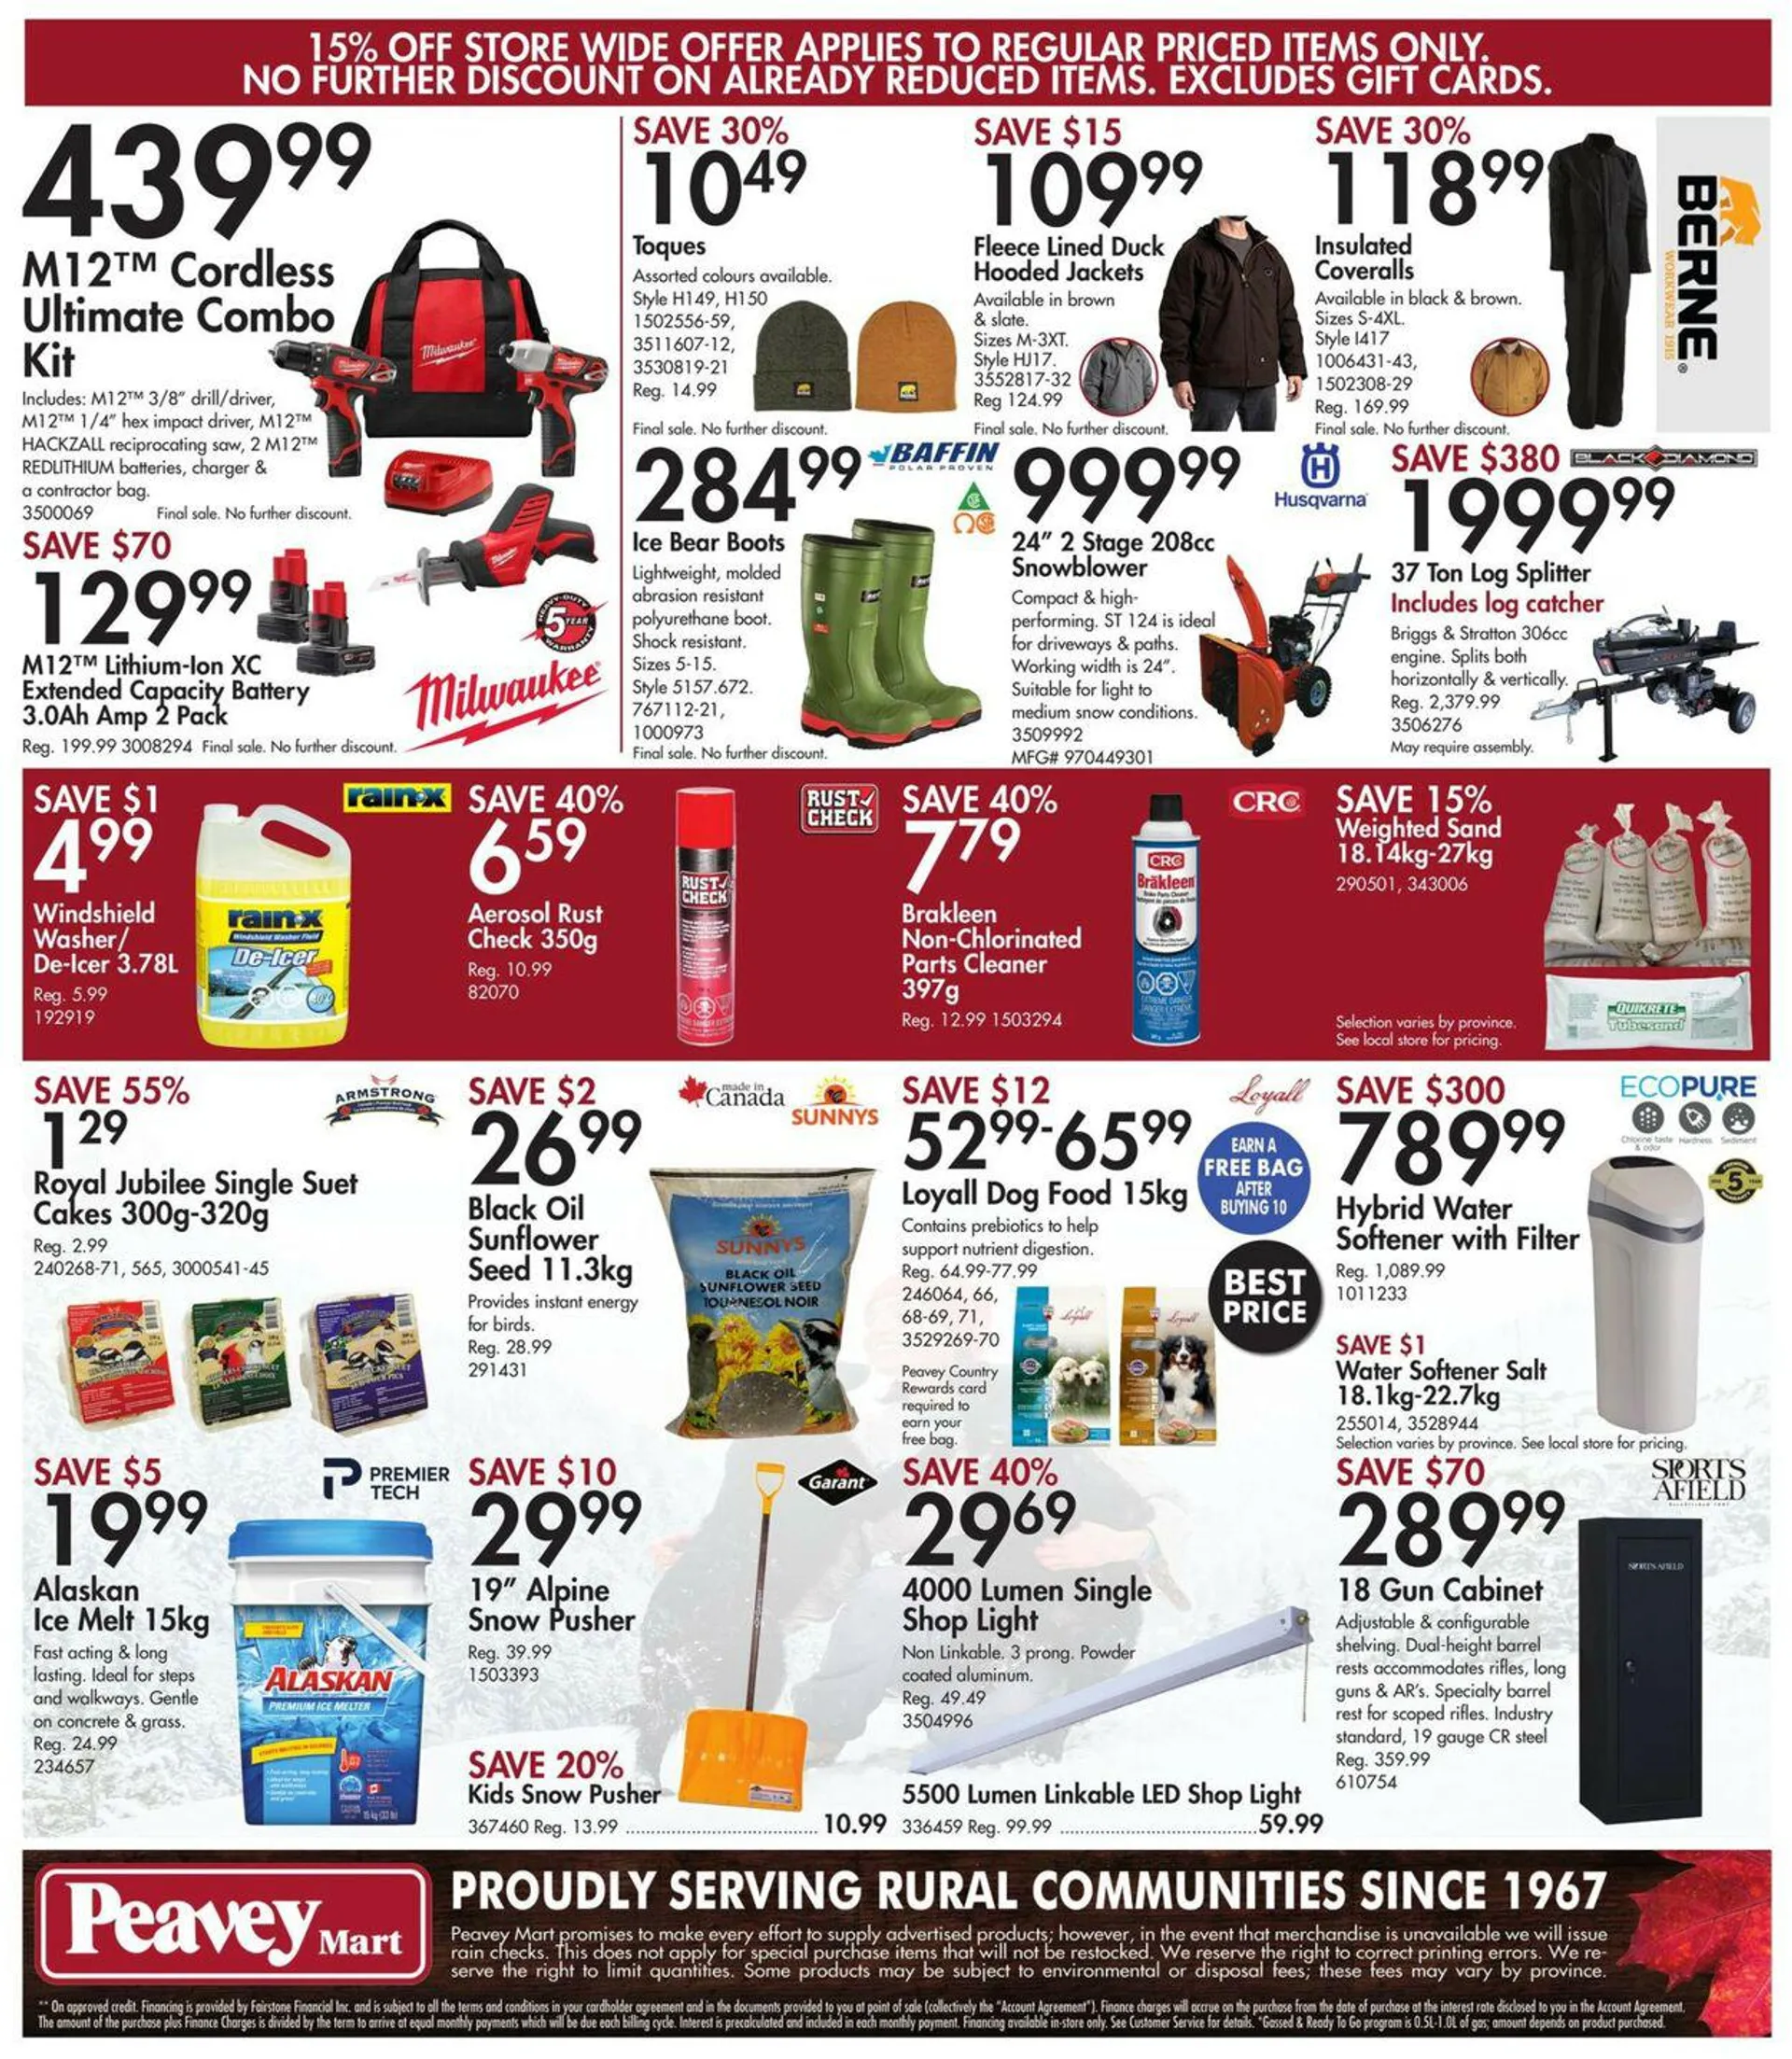 TSC Stores Current flyer - 14